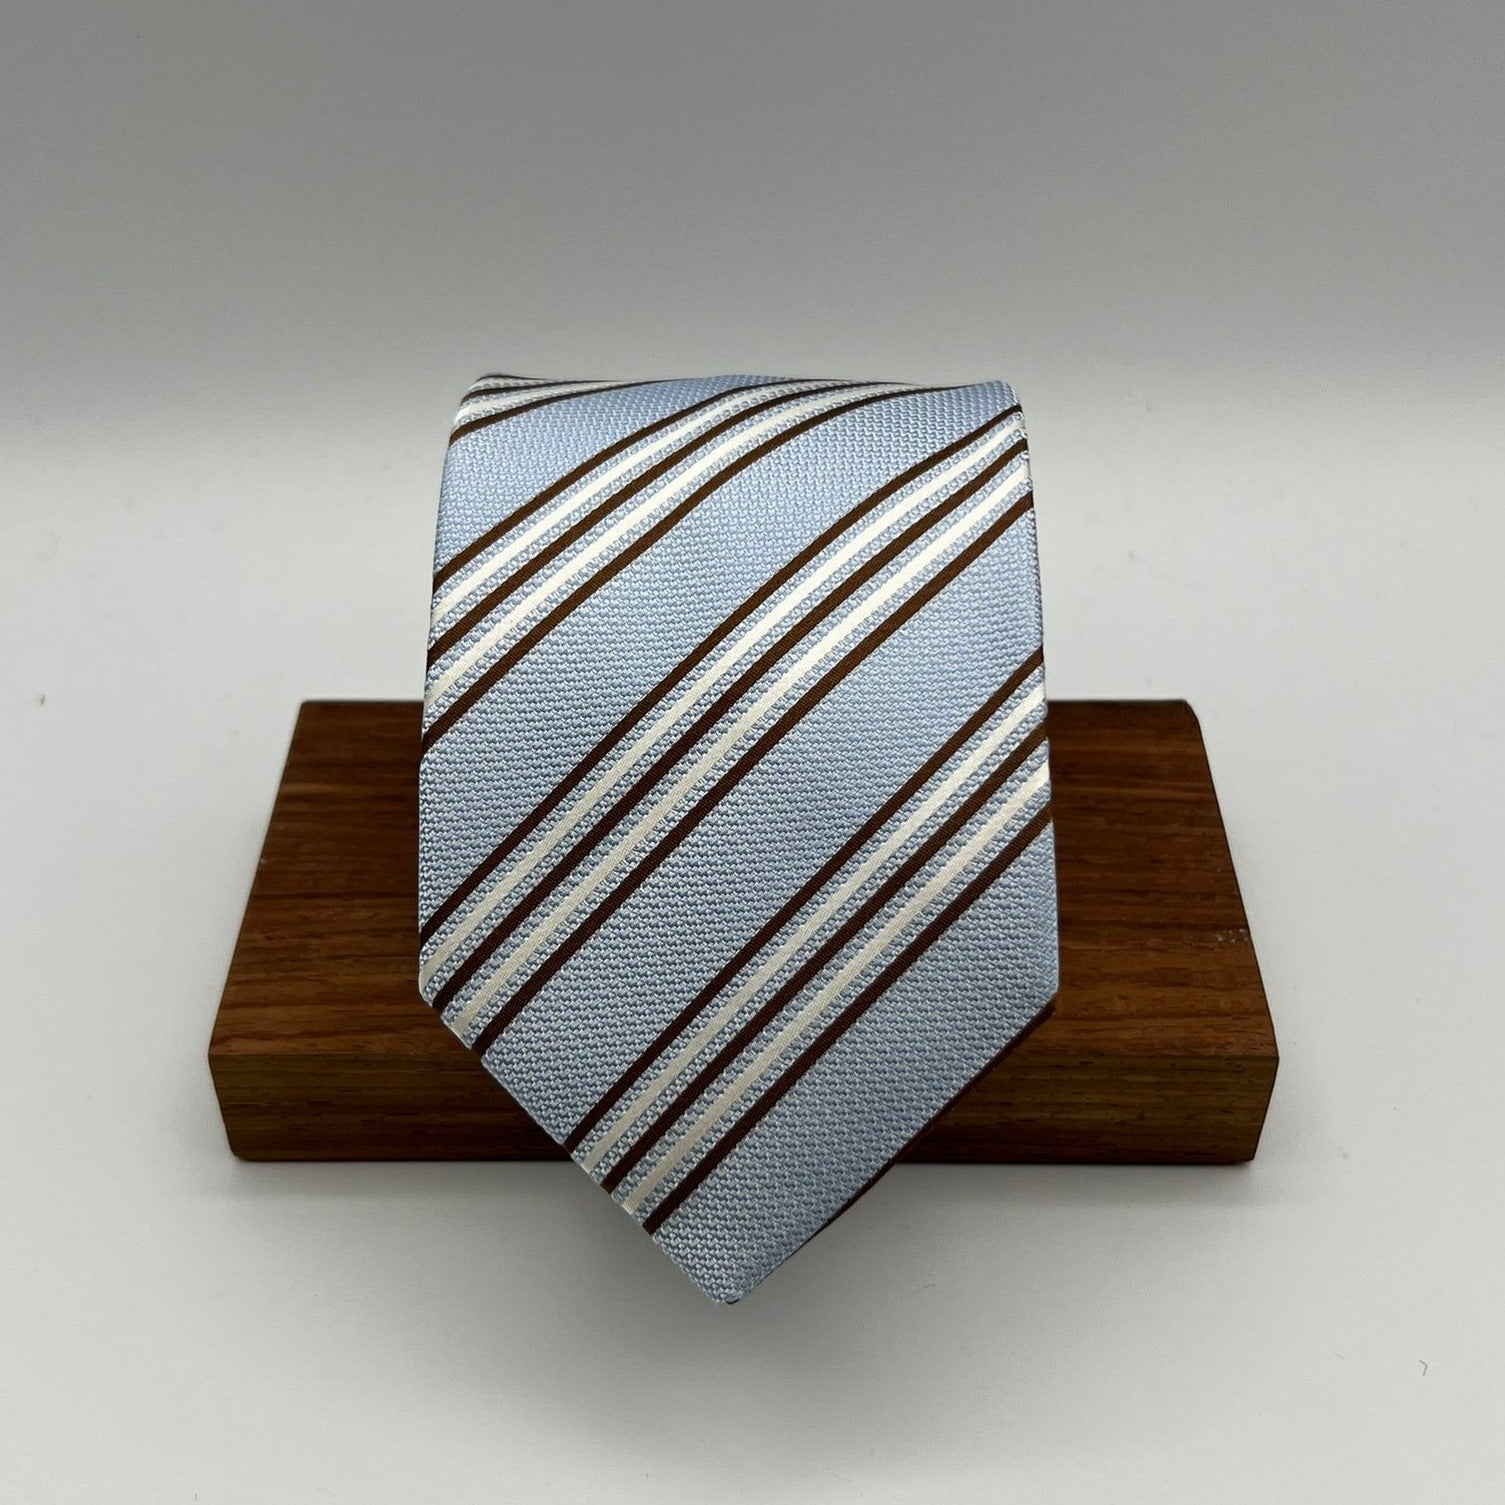 Drake's for Cruciani & Bella 100% Silk Garza Piccola Tipped  Light Blue, Brown and White Stripes  Tie Handmade in England 9 cm x 146 cm #6542